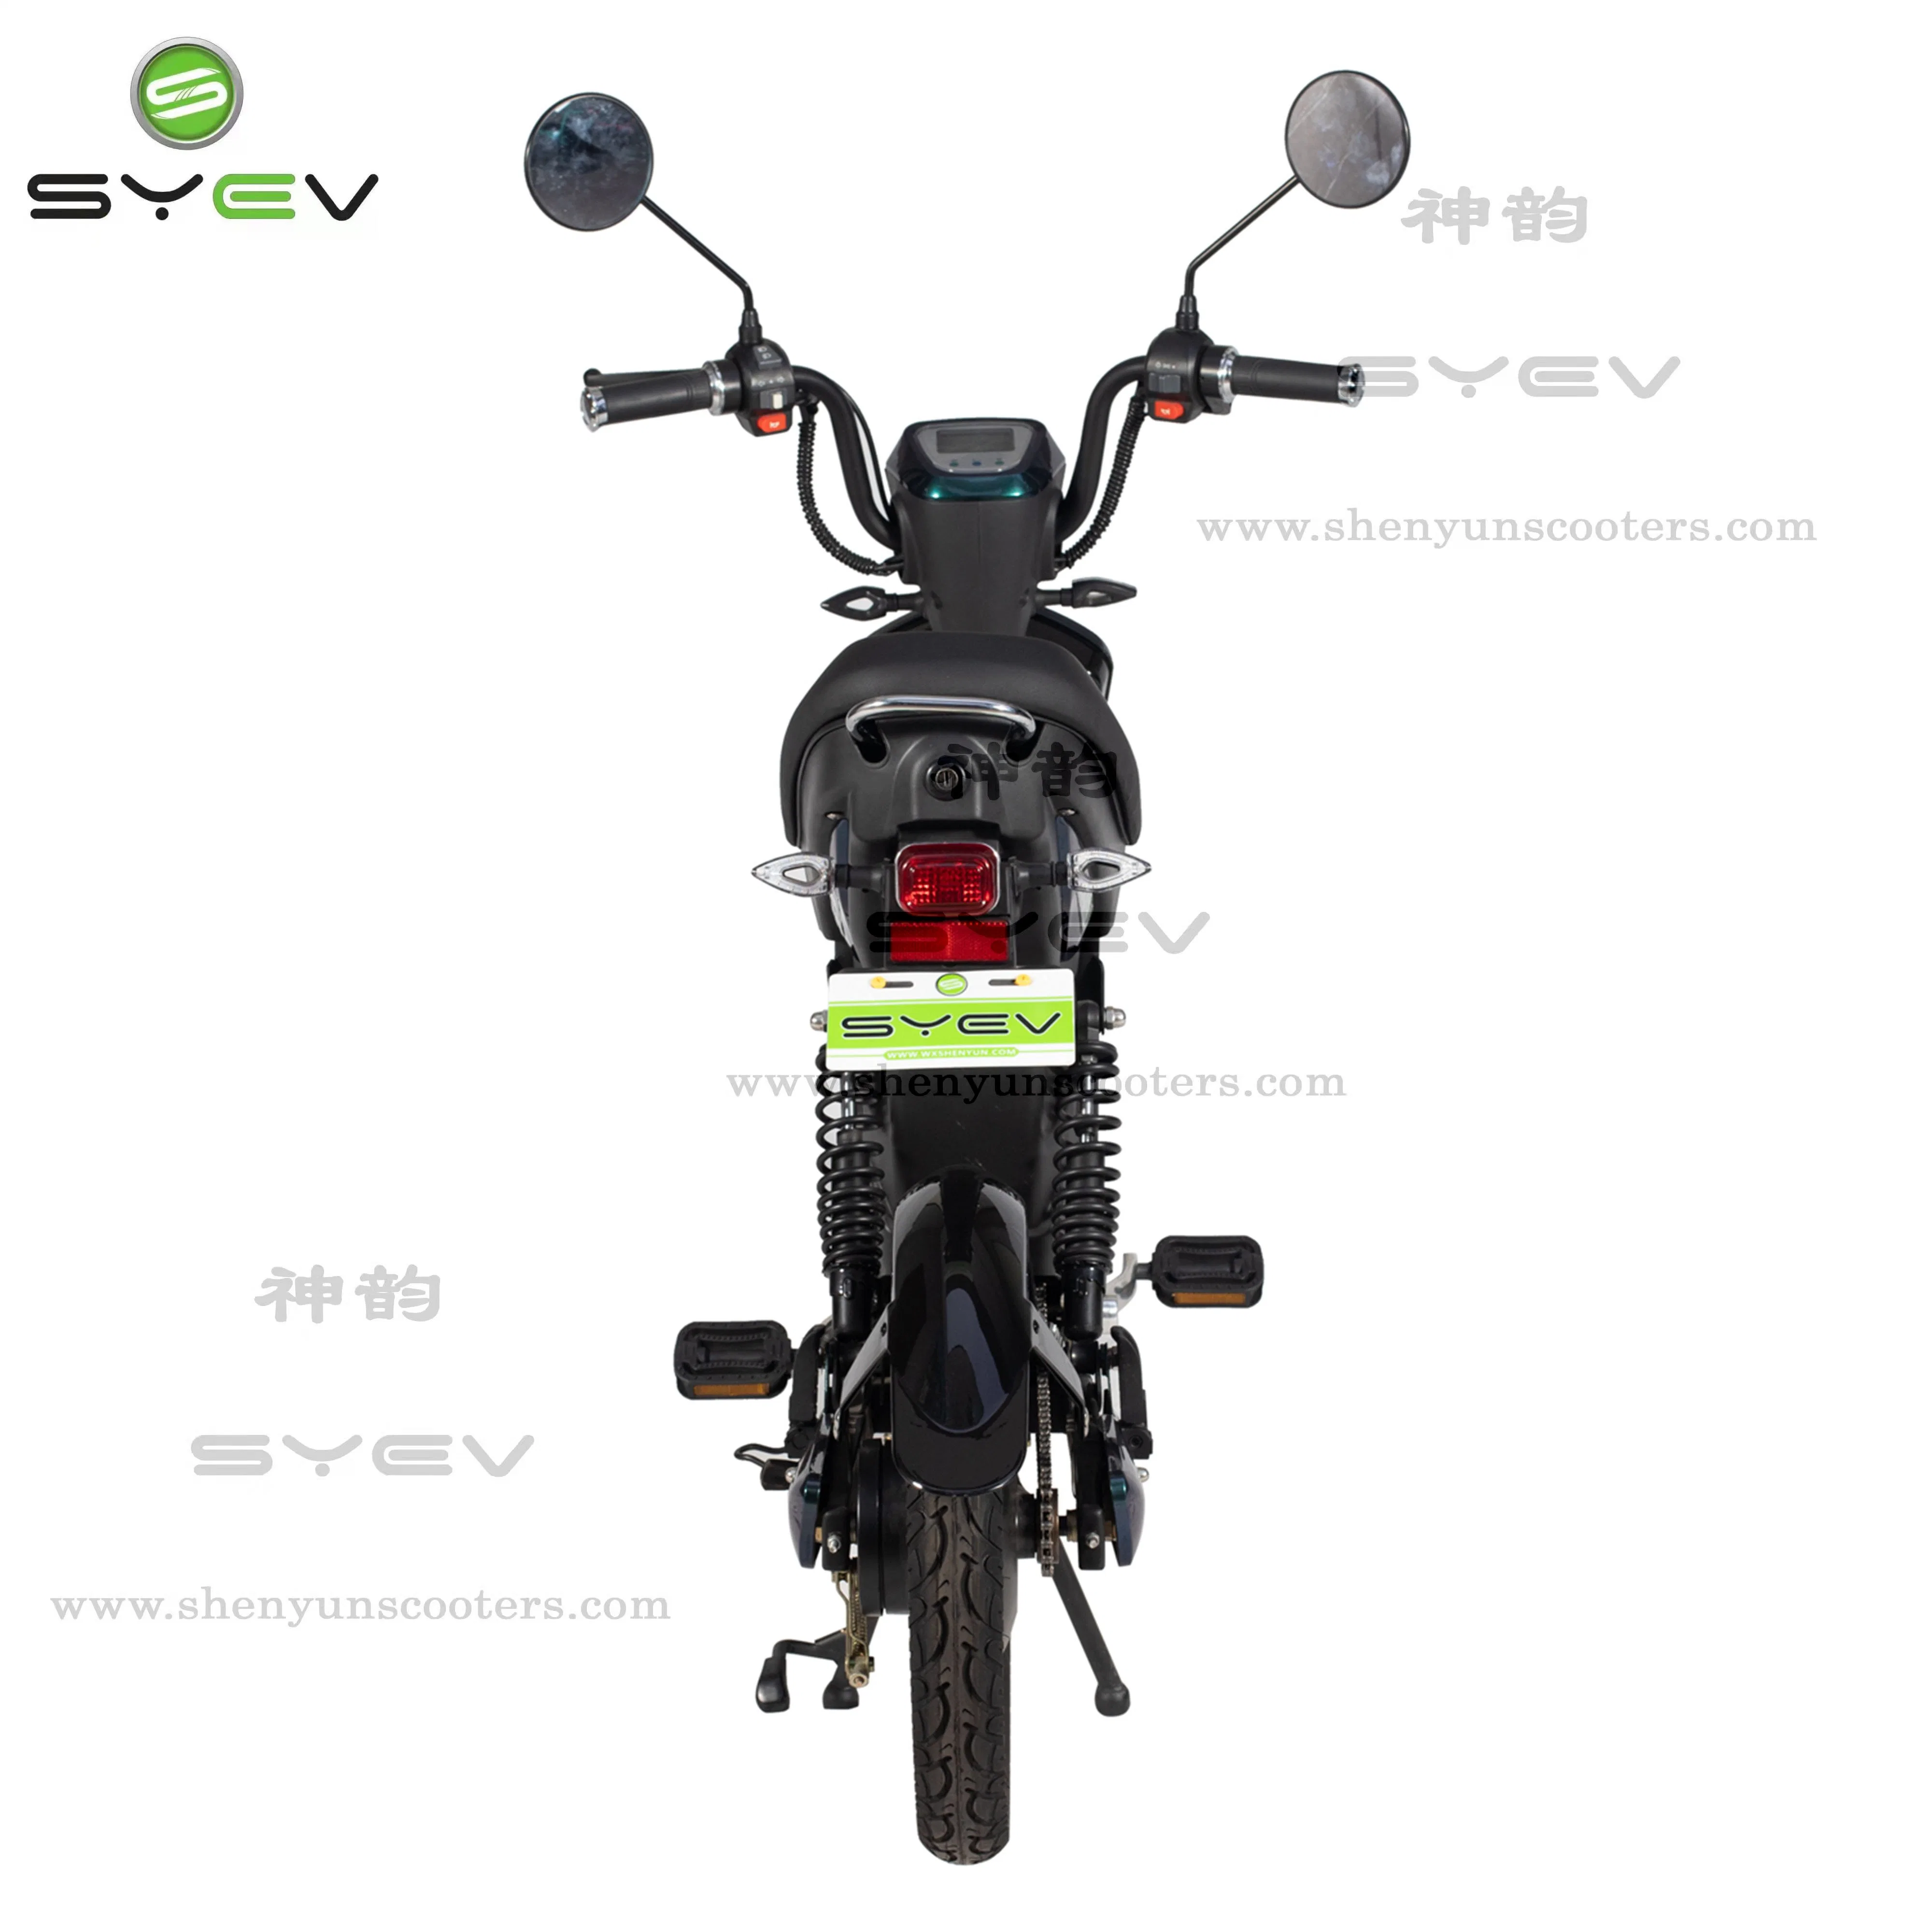 Syev China CKD Moped Long-Lasting Battery Life Electric Scooter 350W/500W Brushless Motor Electric Mopeds with Pedals for Adults Bike Motorcycle